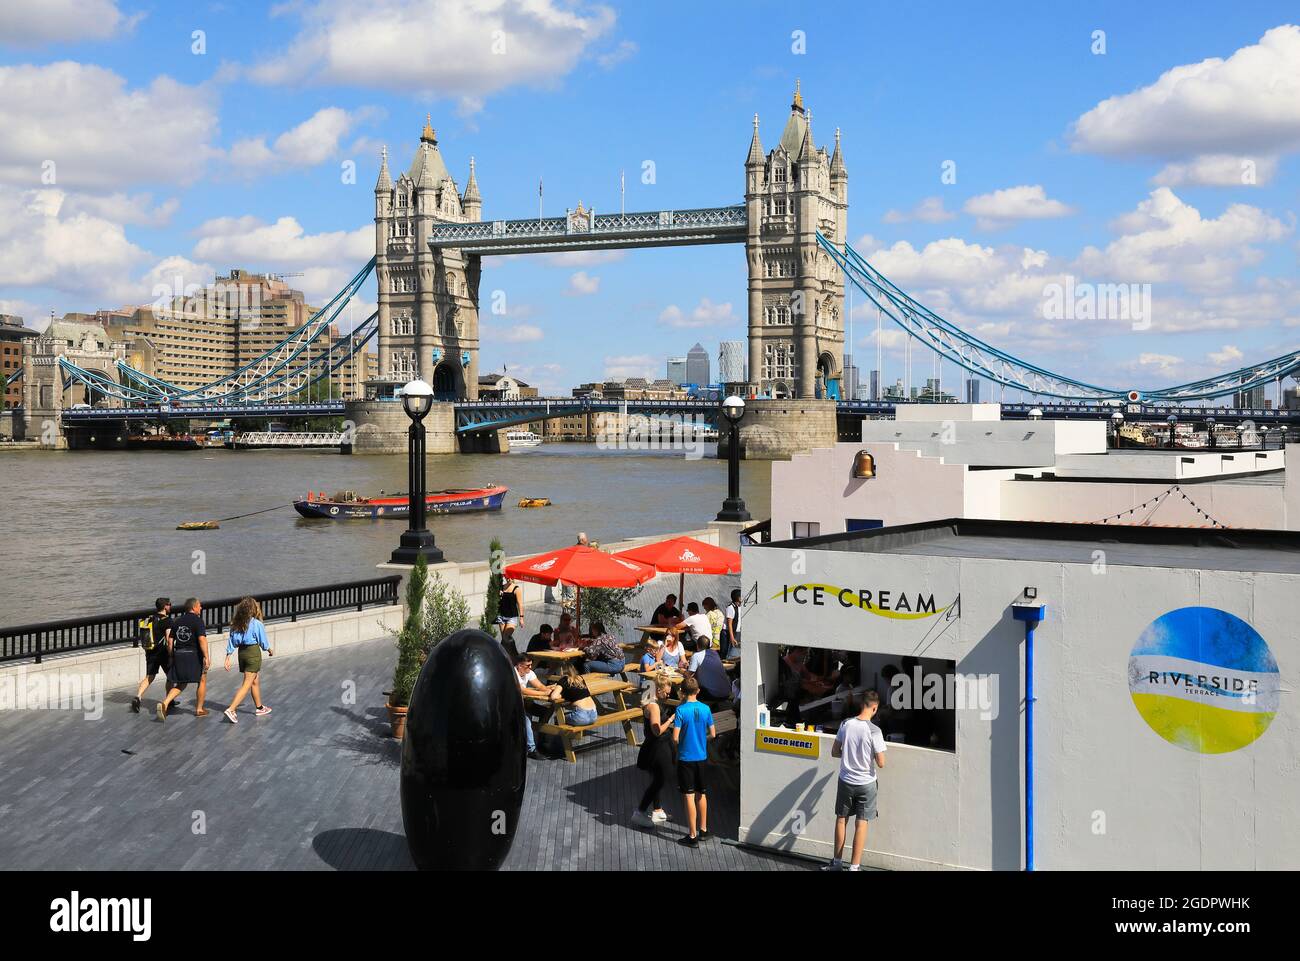 The summer Riverside Terrace on the banks of the River Thames, with iconic Tower Bridge beyond, in London, UK Stock Photo